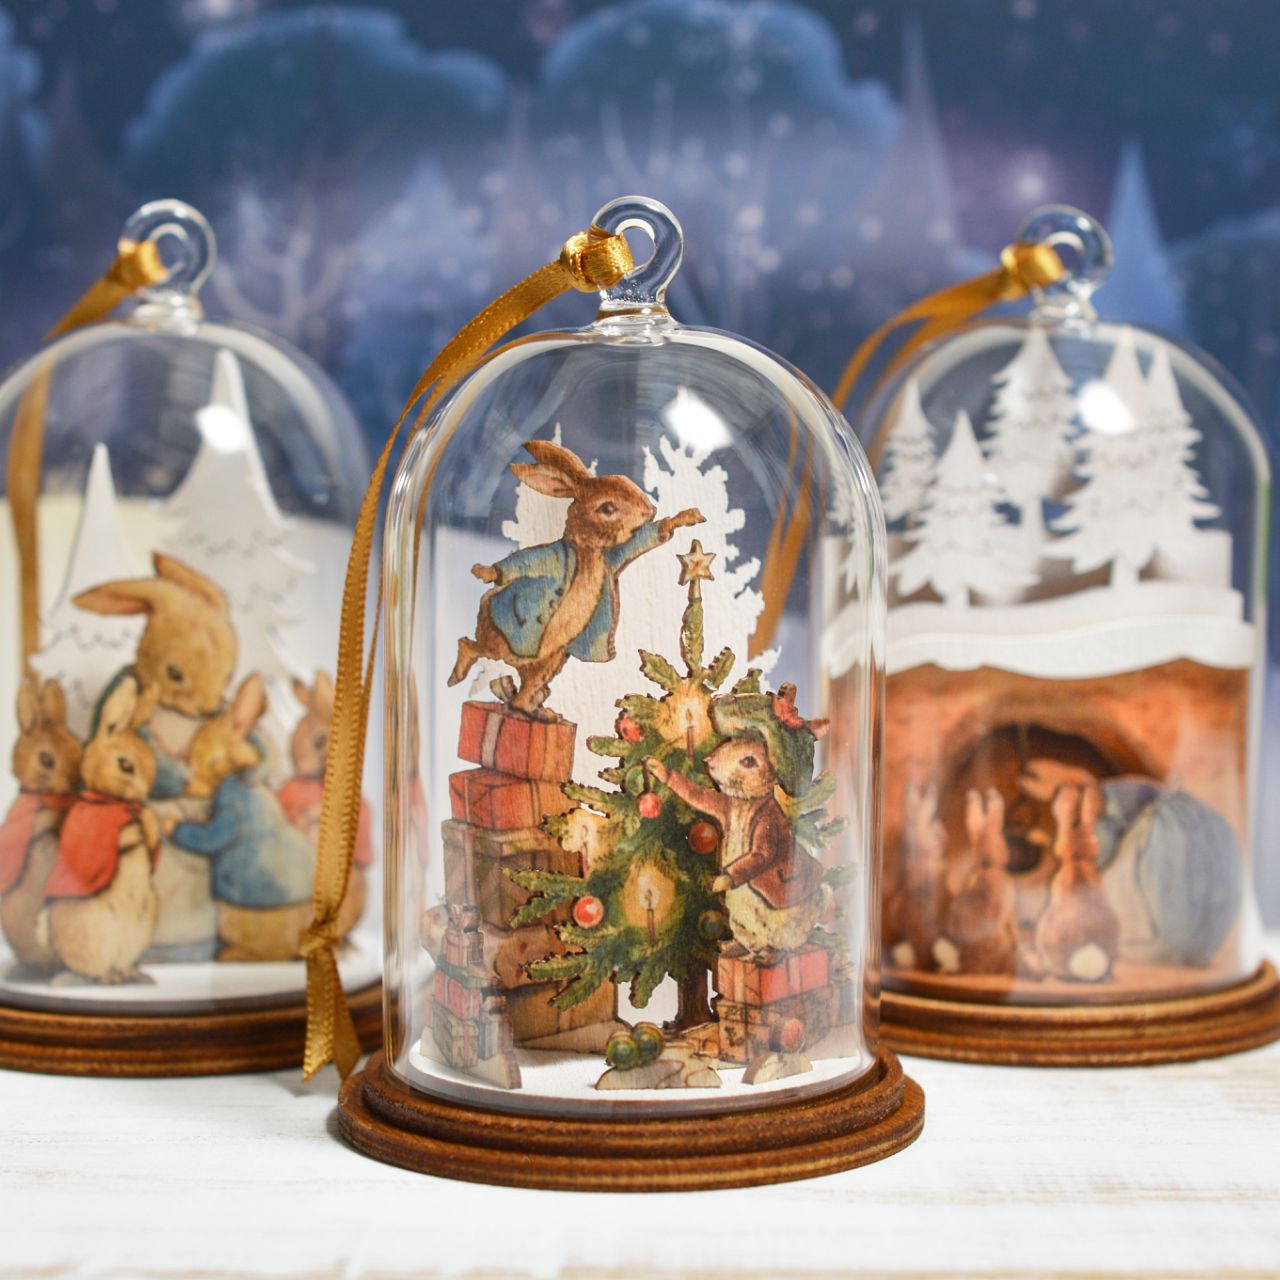 Peter Rabbit and Benjamin Bunny Christmas Wooden Hanging Ornament  This festive Peter Rabbit and Benjamin Bunny wooden hanging ornament has been intricately created and comes encased in a beautiful eco-friendly glass dome. This classic vintage style helps bring to life the original illustrations from the Beatrix Potter stories.